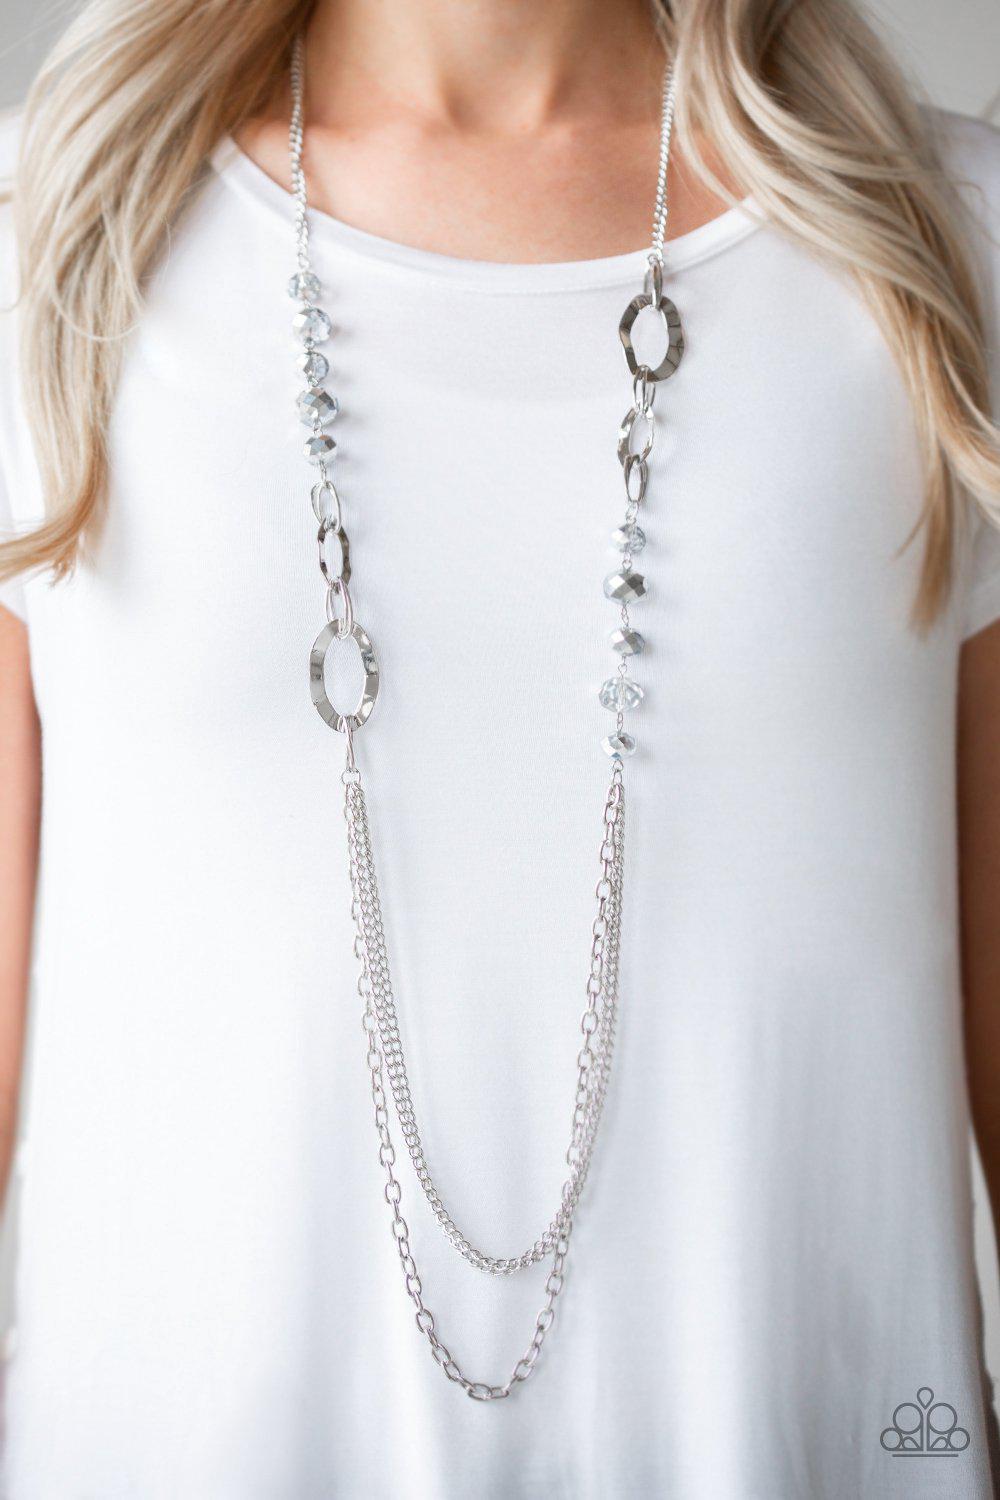 Modern Girl Glam Silver Necklace - Paparazzi Accessories- model - CarasShop.com - $5 Jewelry by Cara Jewels